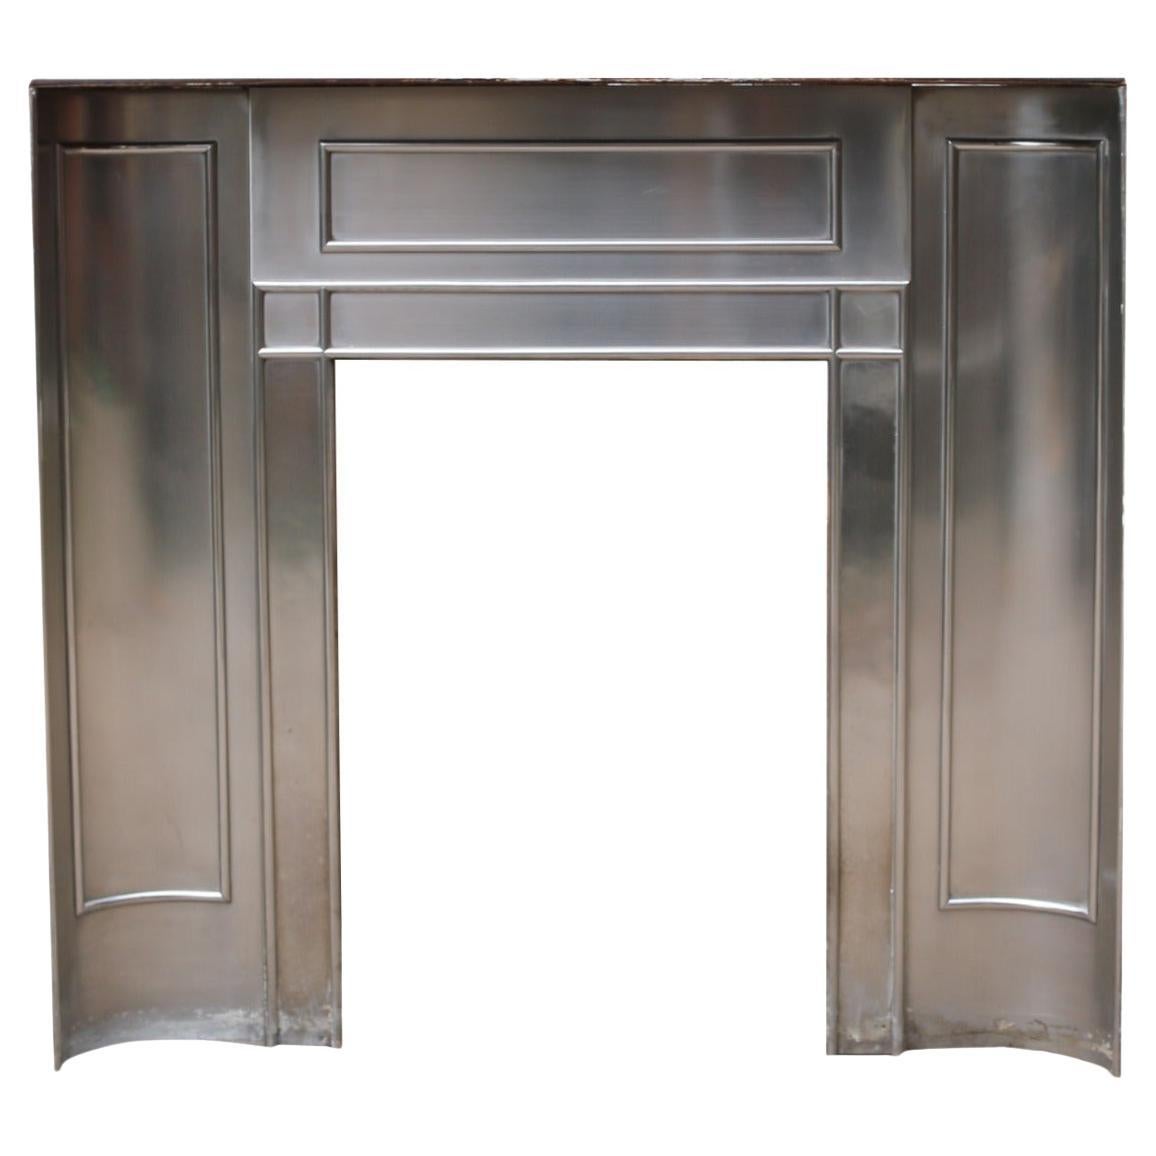 Antique Stainless Steel Fire Insert For Sale